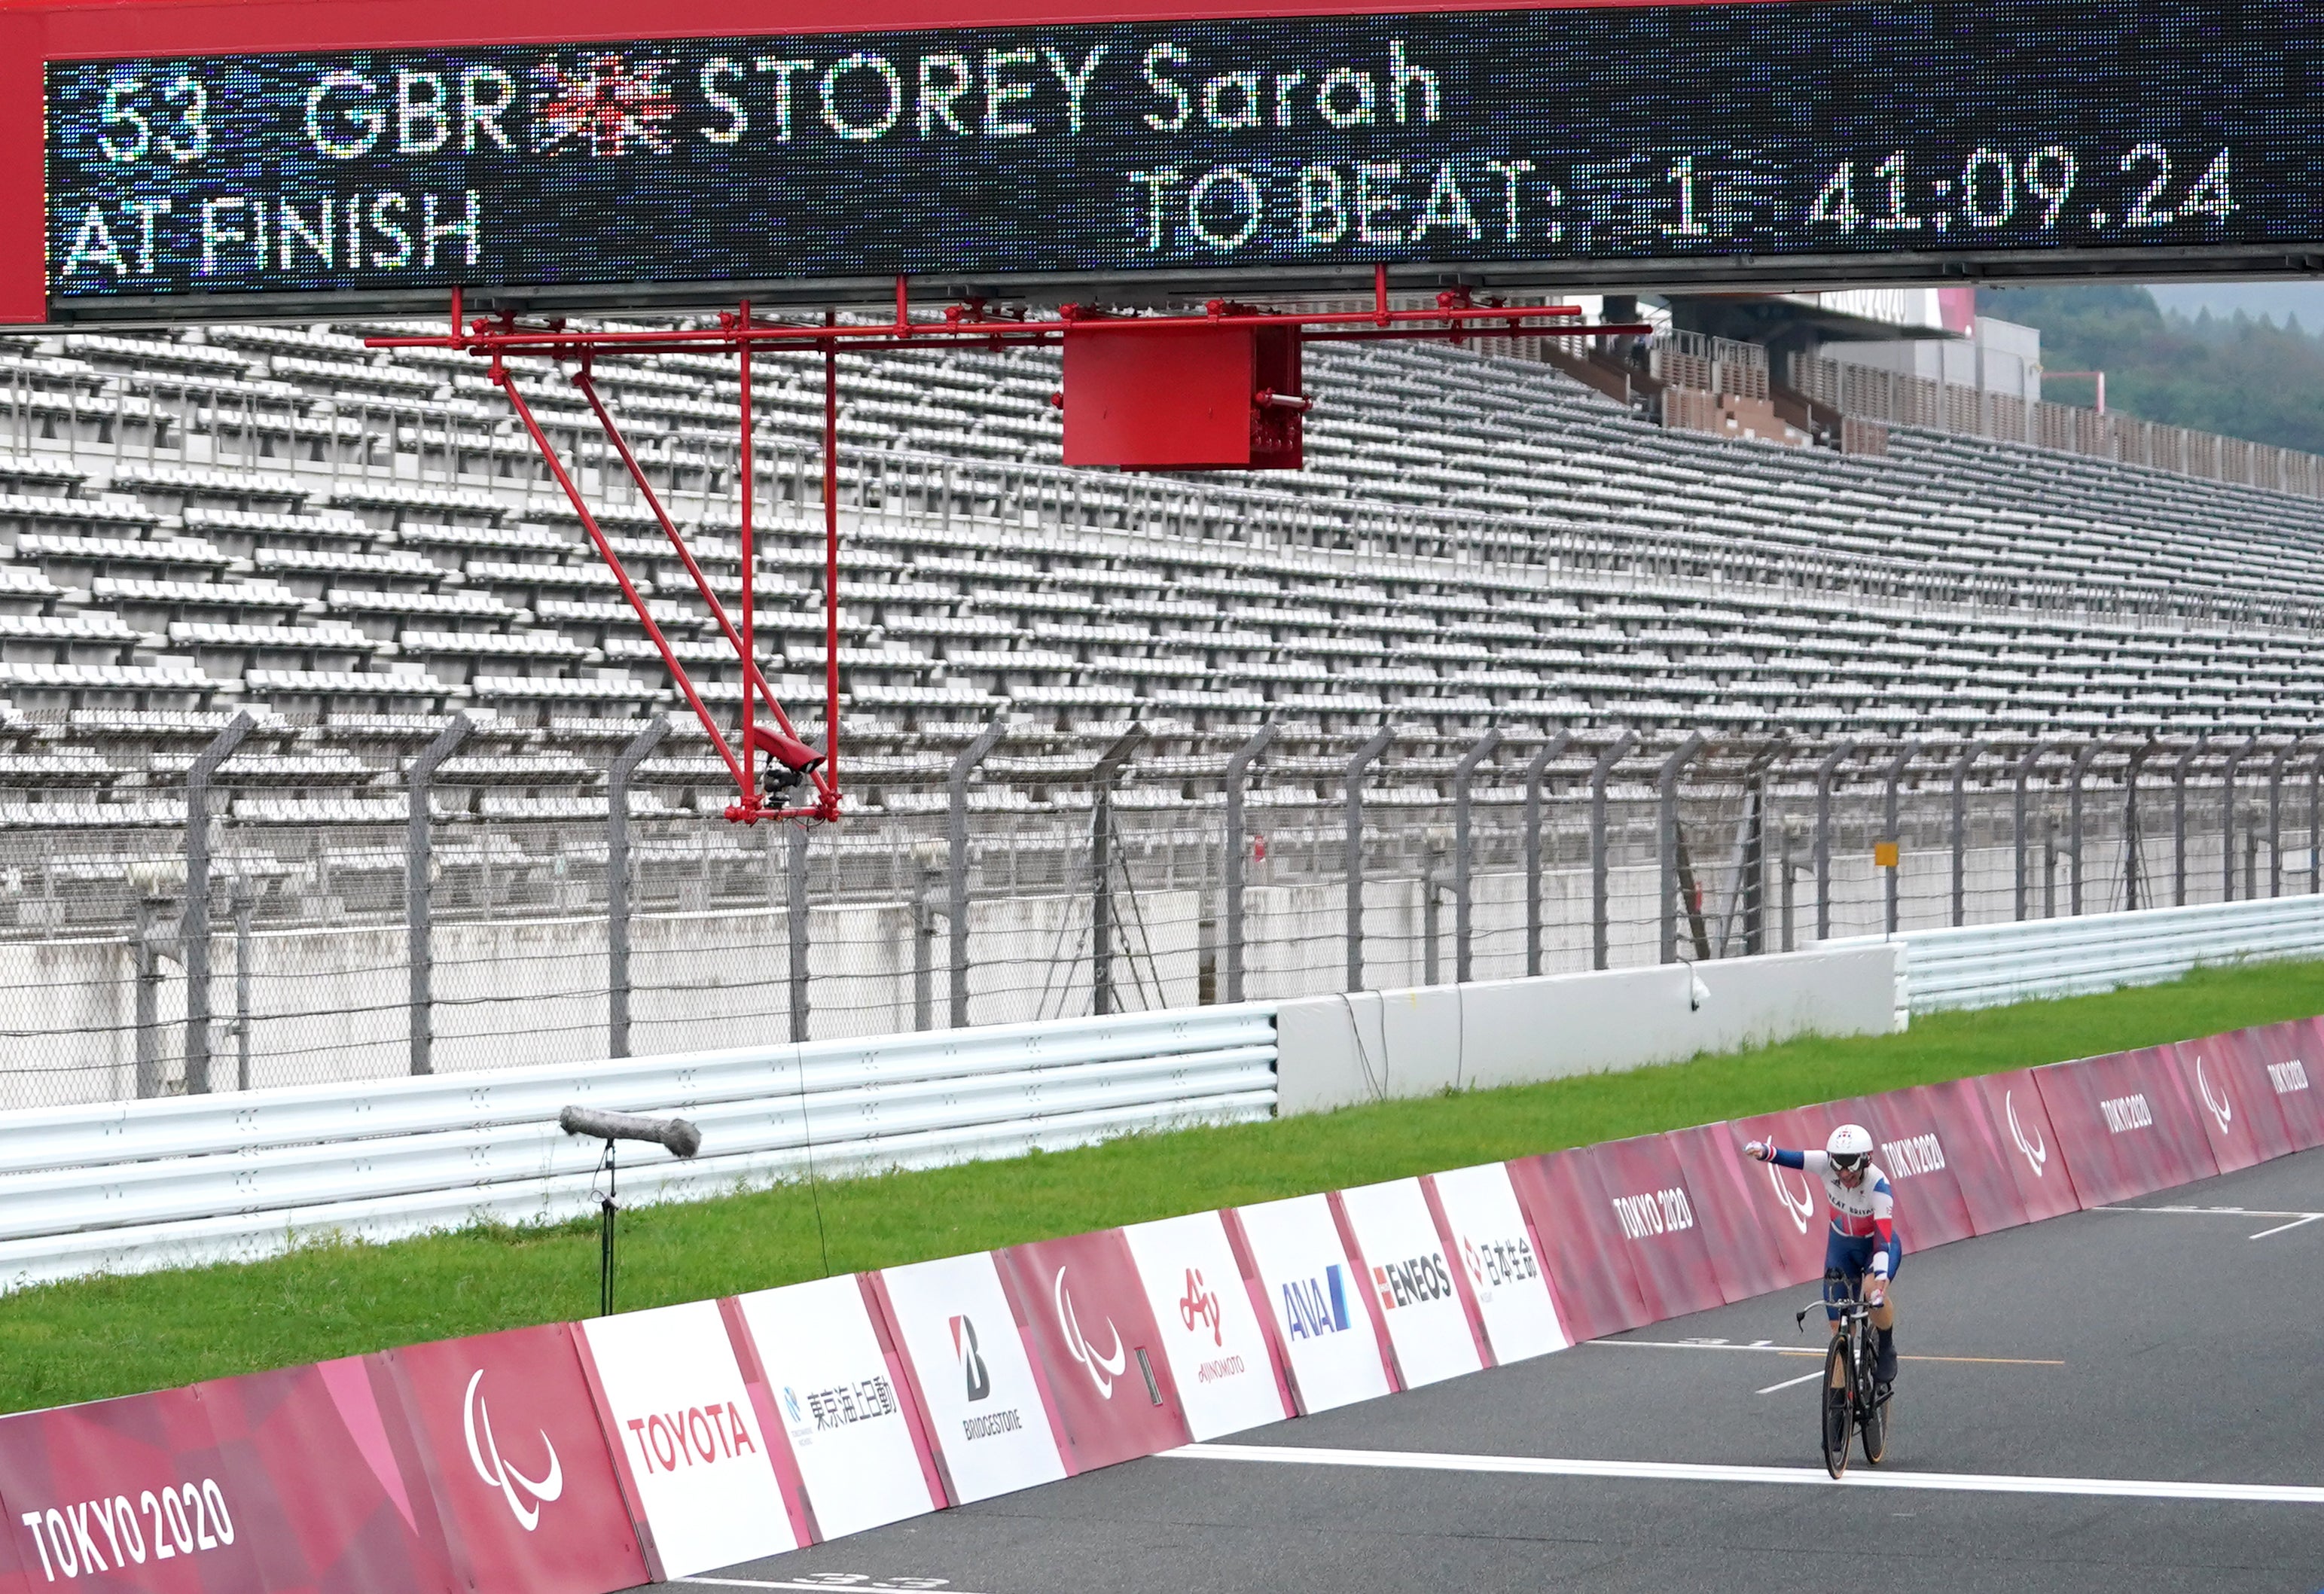 Storey finishes 90 second ahead of her nearest rival at Fuji International Speedway